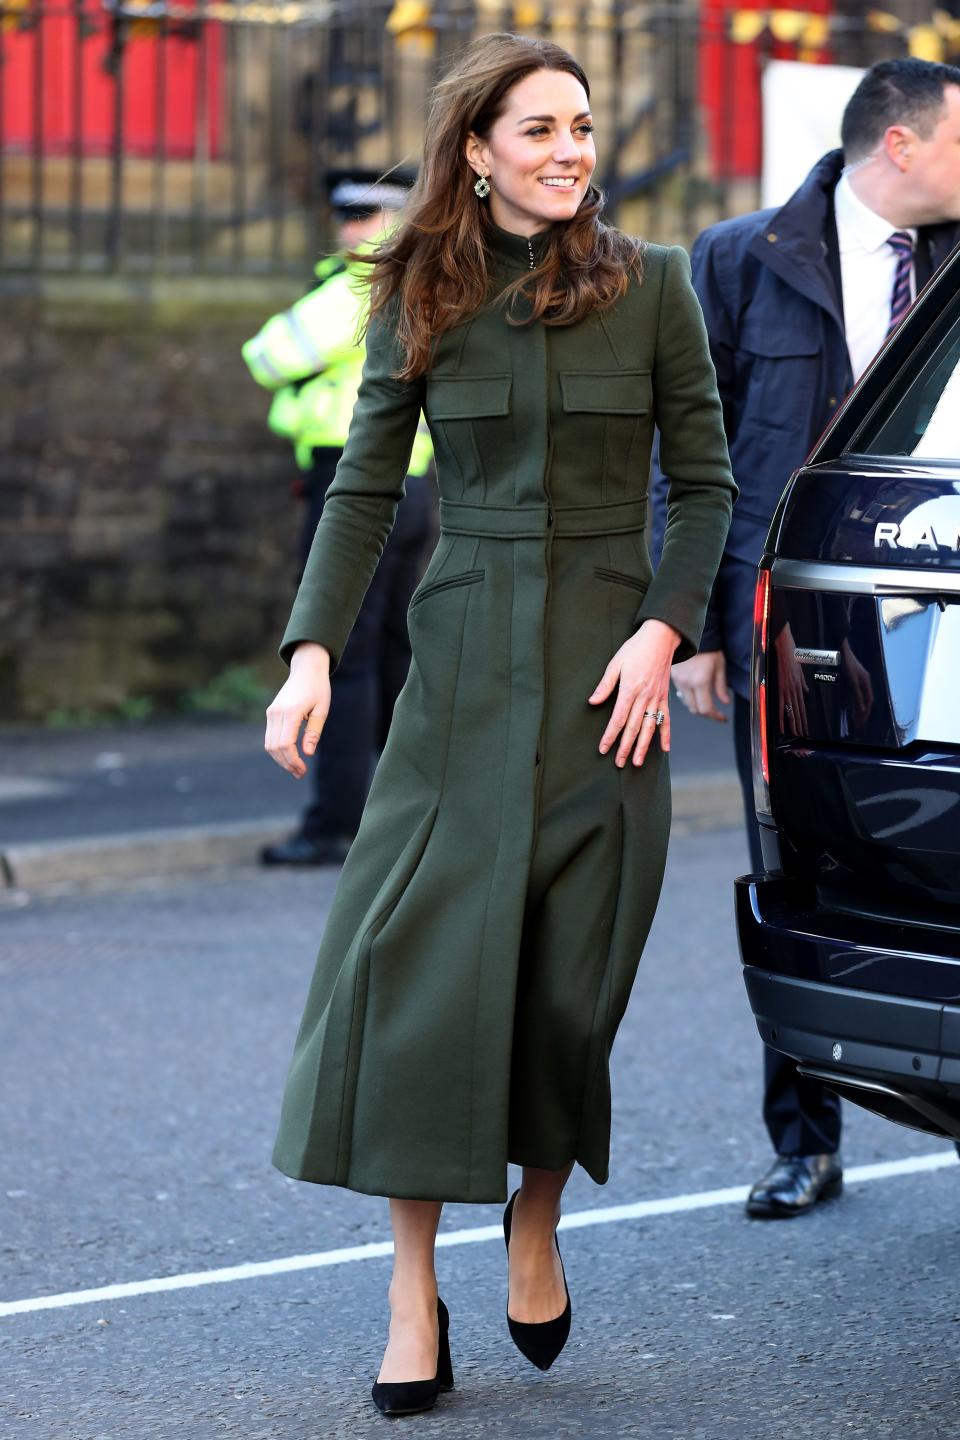 Britain's Catherine, Duchess of Cambridge arrives at the British Asian 'MyLahores' flagship restaurant in Bradford on January 15, 2020, to learn about some of the community work undertaken by the restaurant. (Photo by Chris Jackson / POOL / AFP) (Photo by CHRIS JACKSON/POOL/AFP via Getty Images)